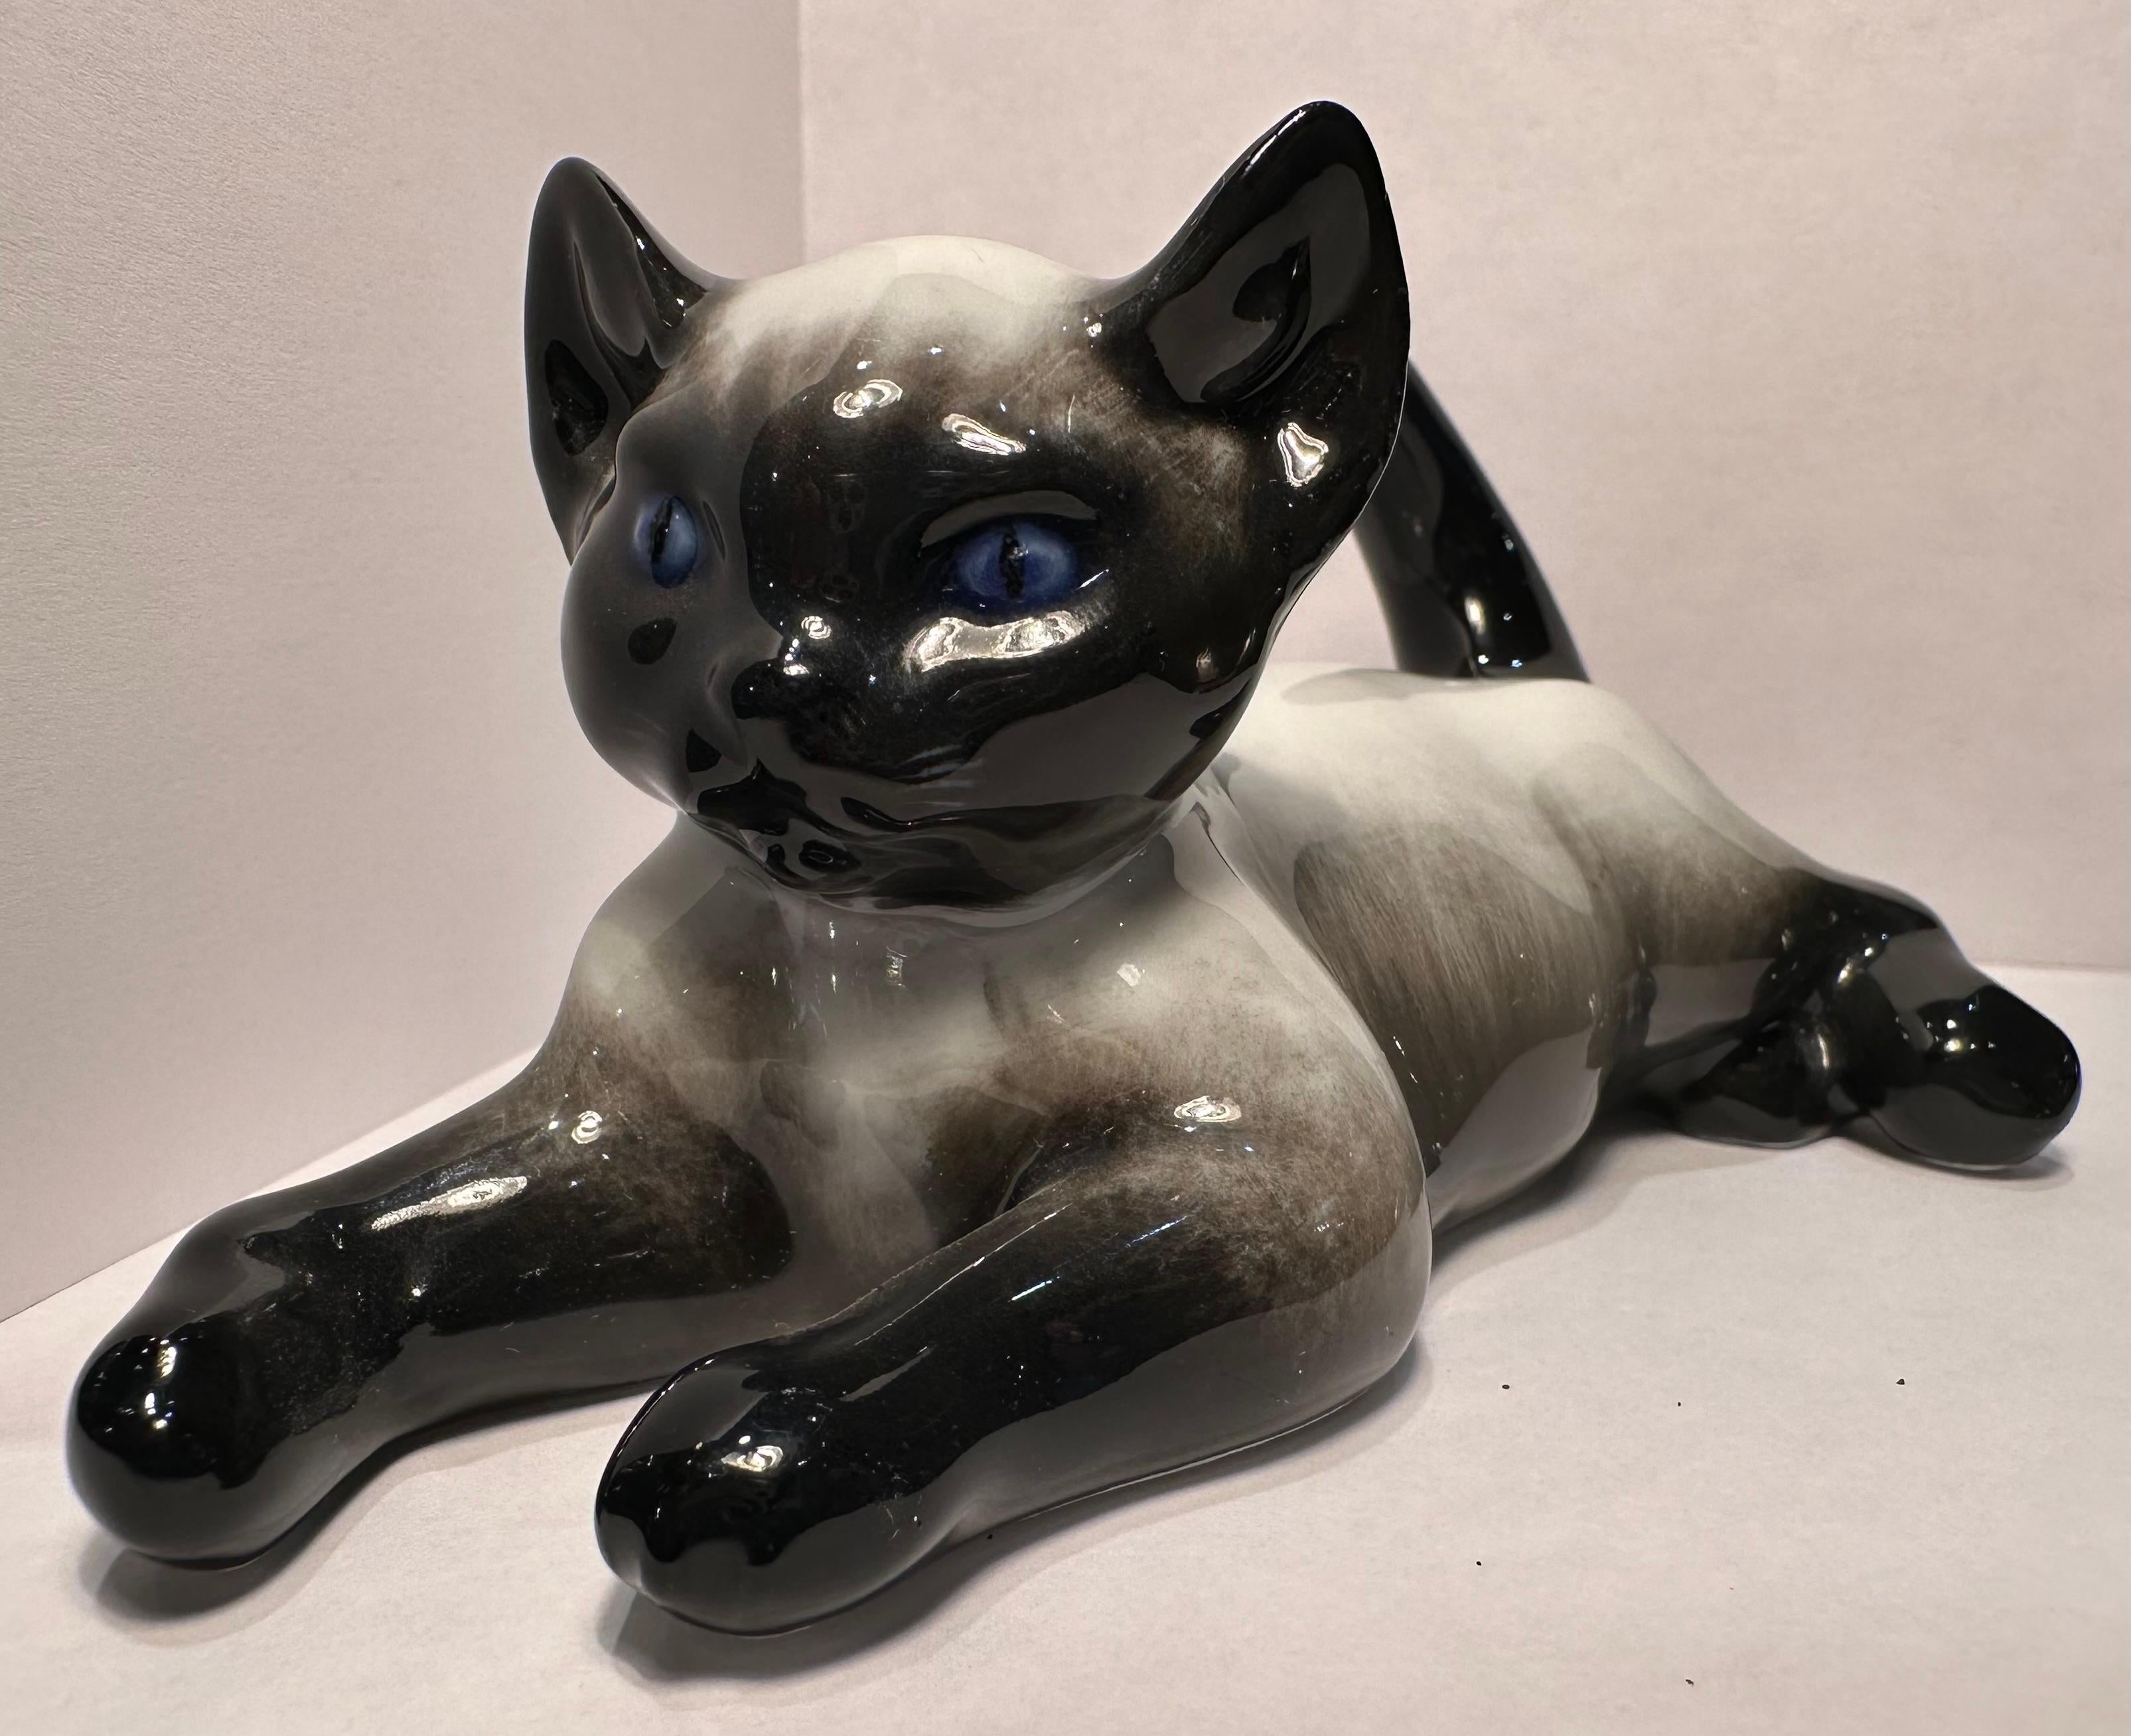 Finest Quality Rosenthal Germany Siamese Kitten Cat Porcelain Figurine In Excellent Condition For Sale In Tustin, CA